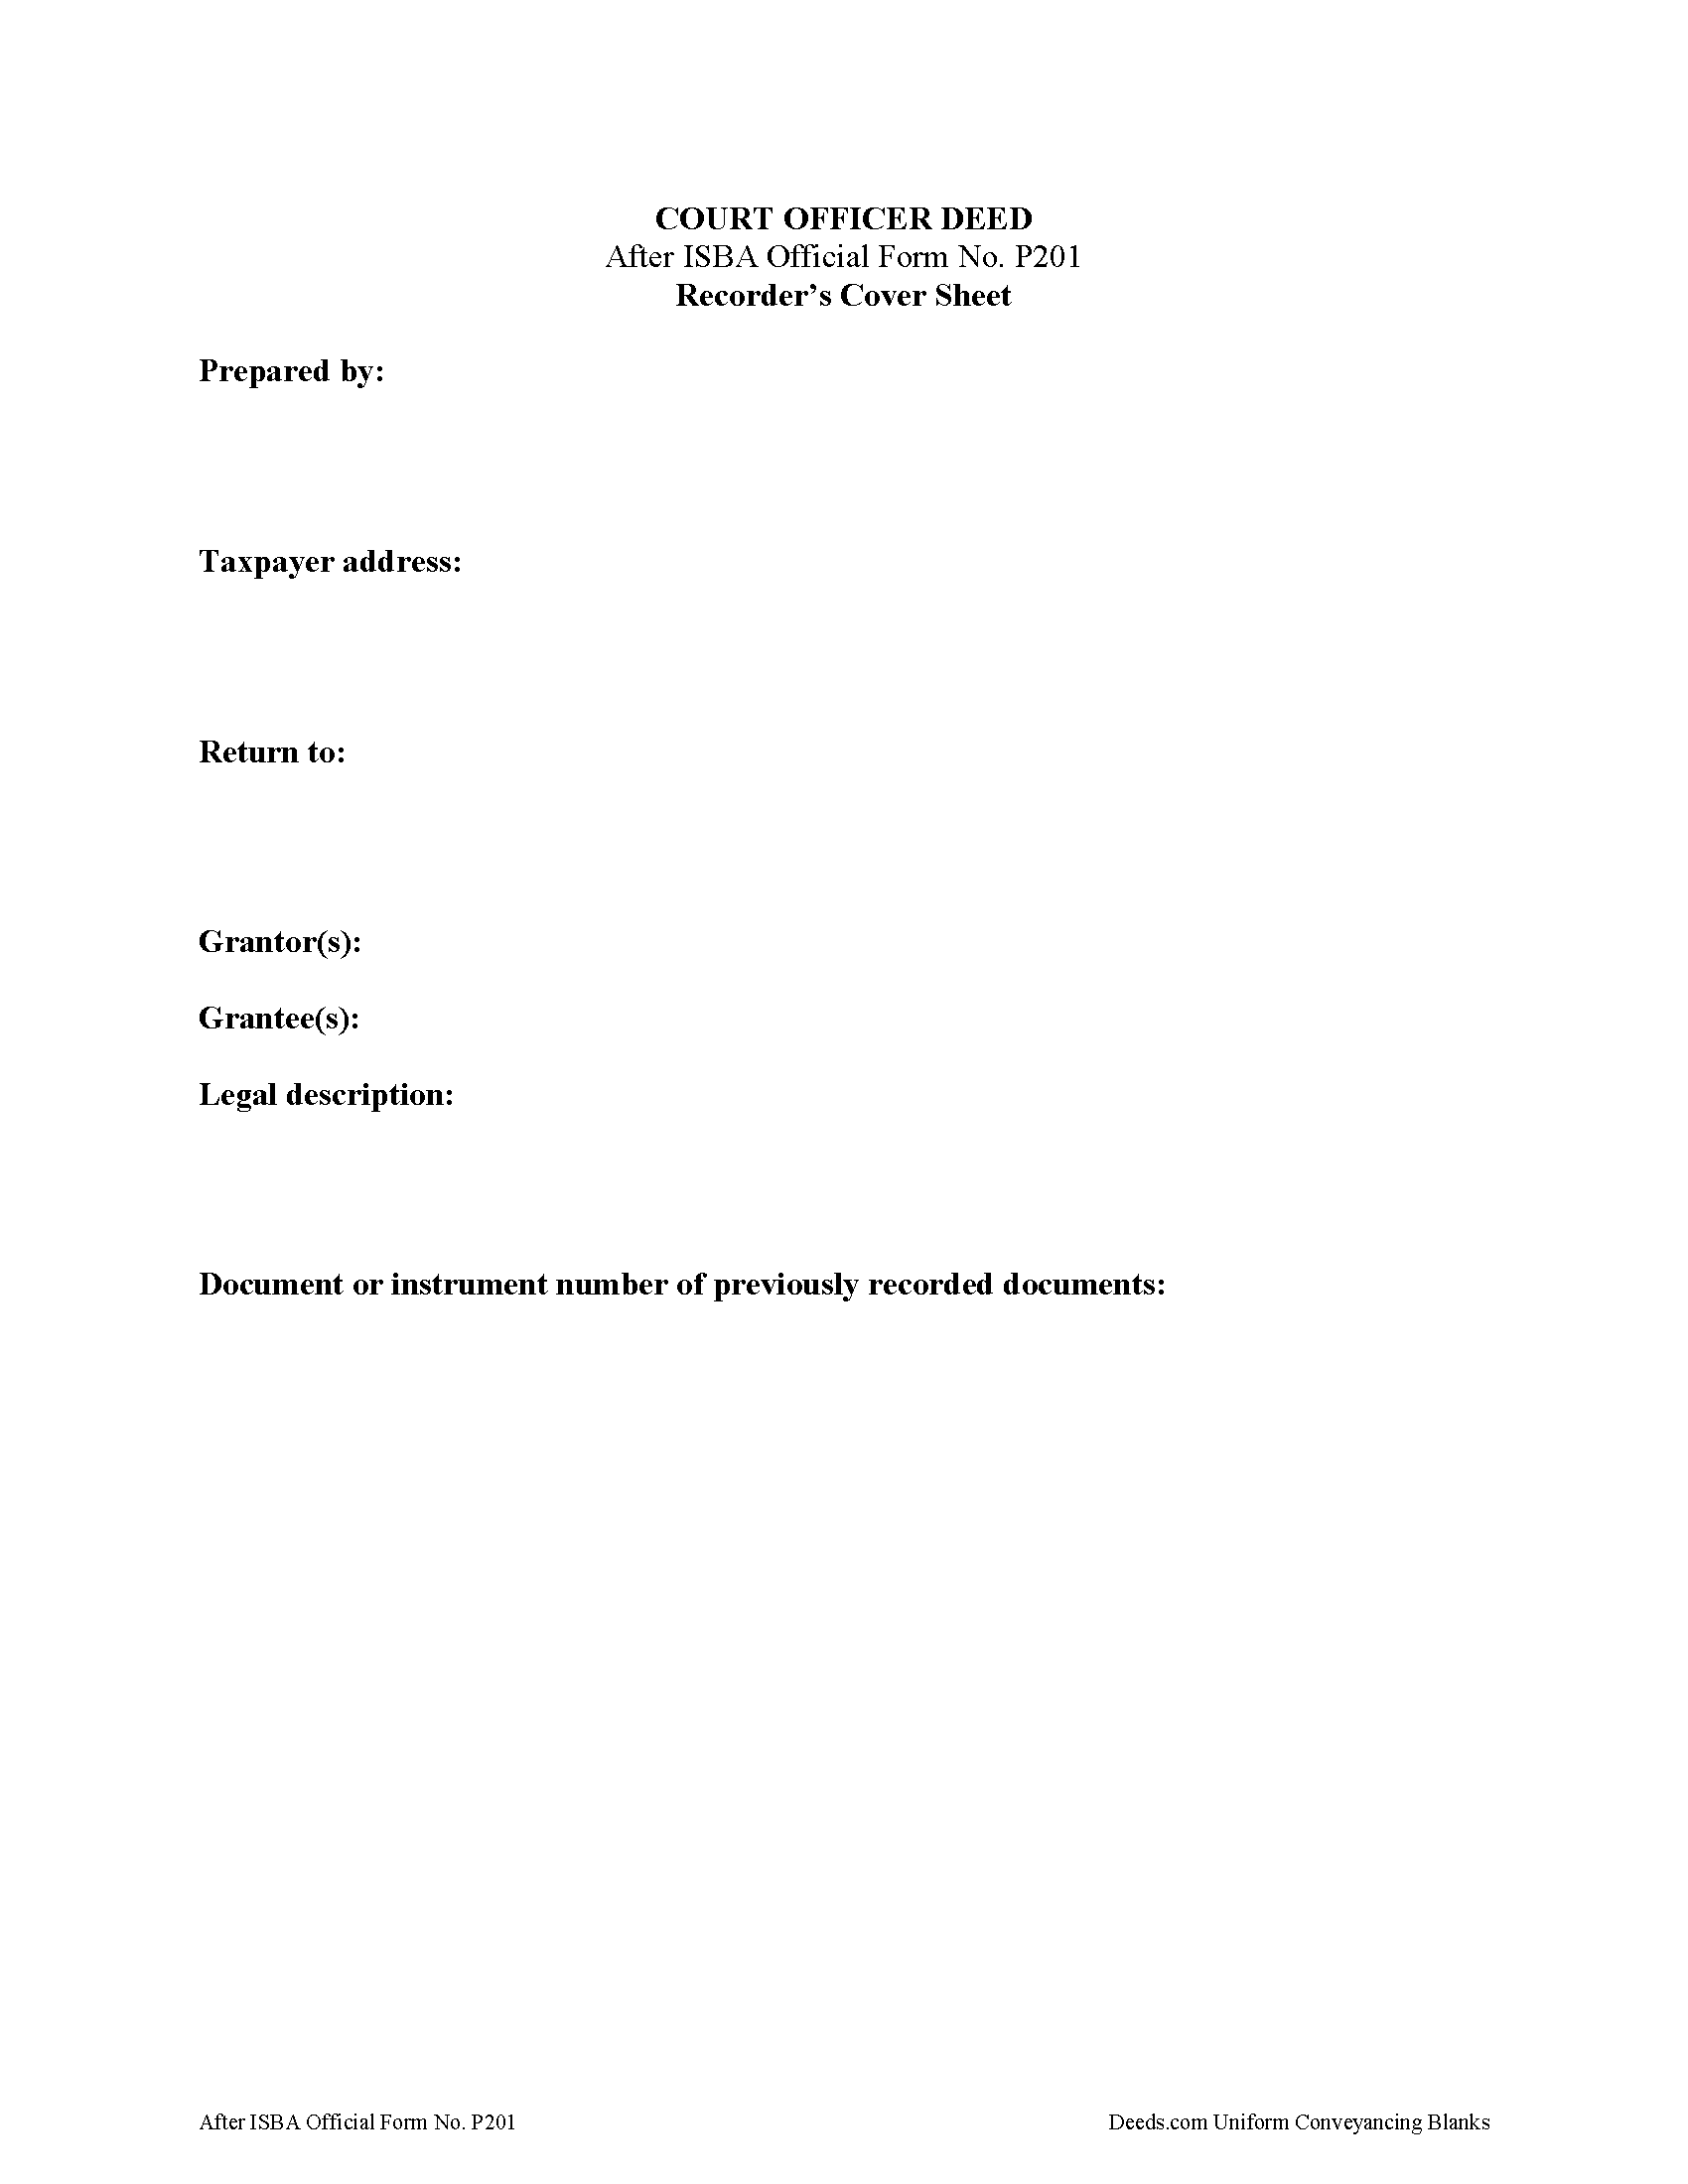 Court Officer Deed Form